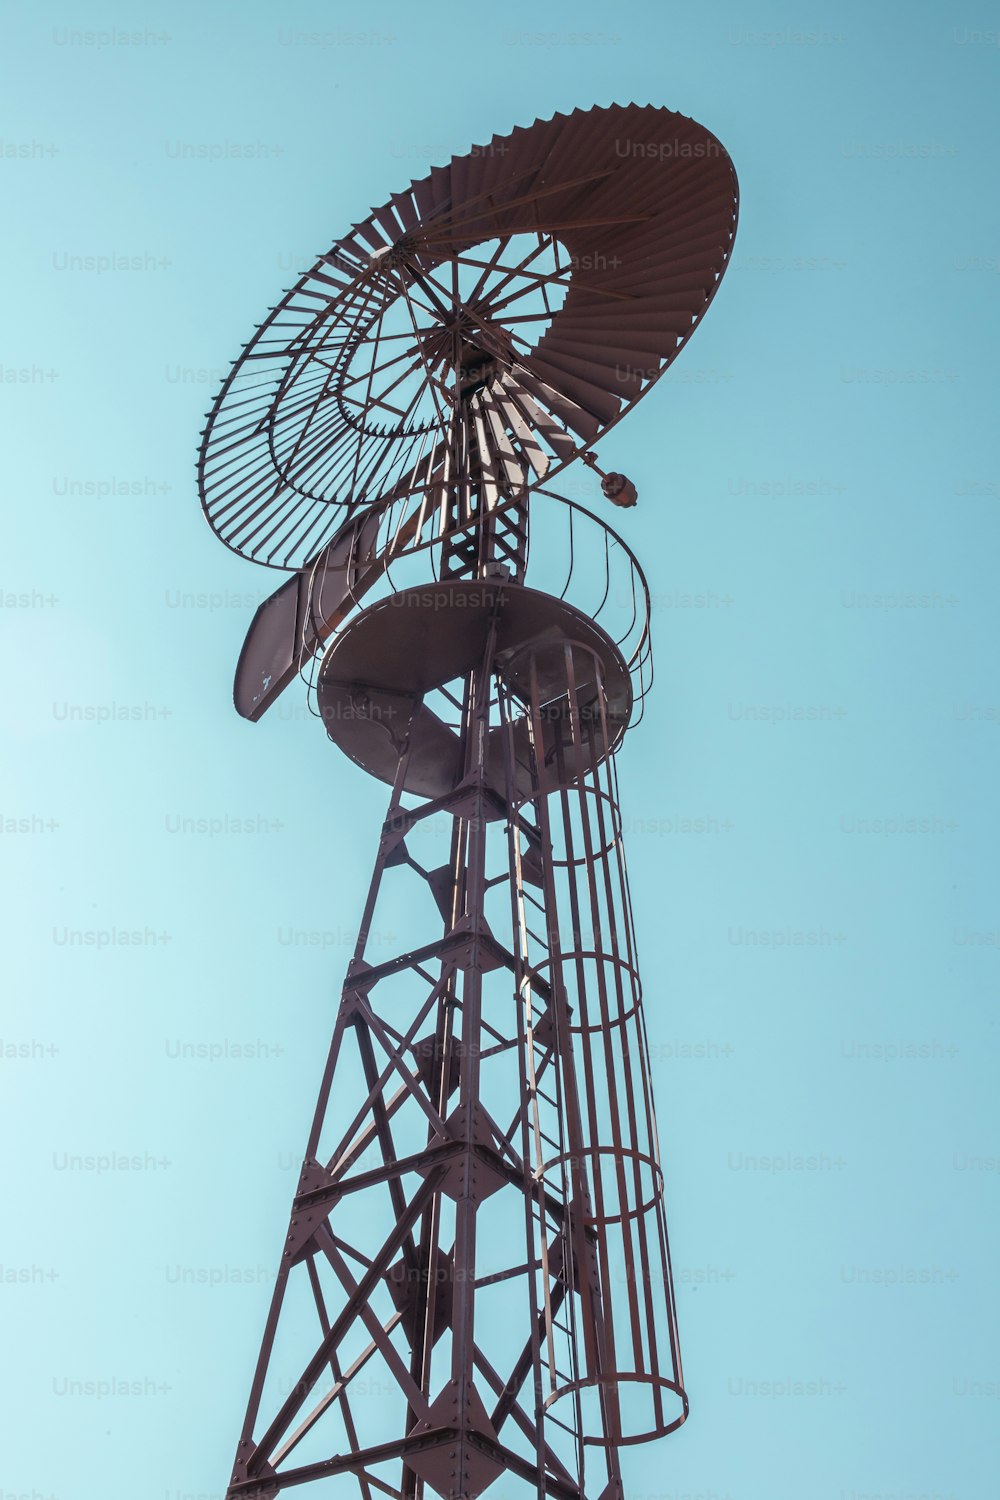 a metal tower with a fan on top of it